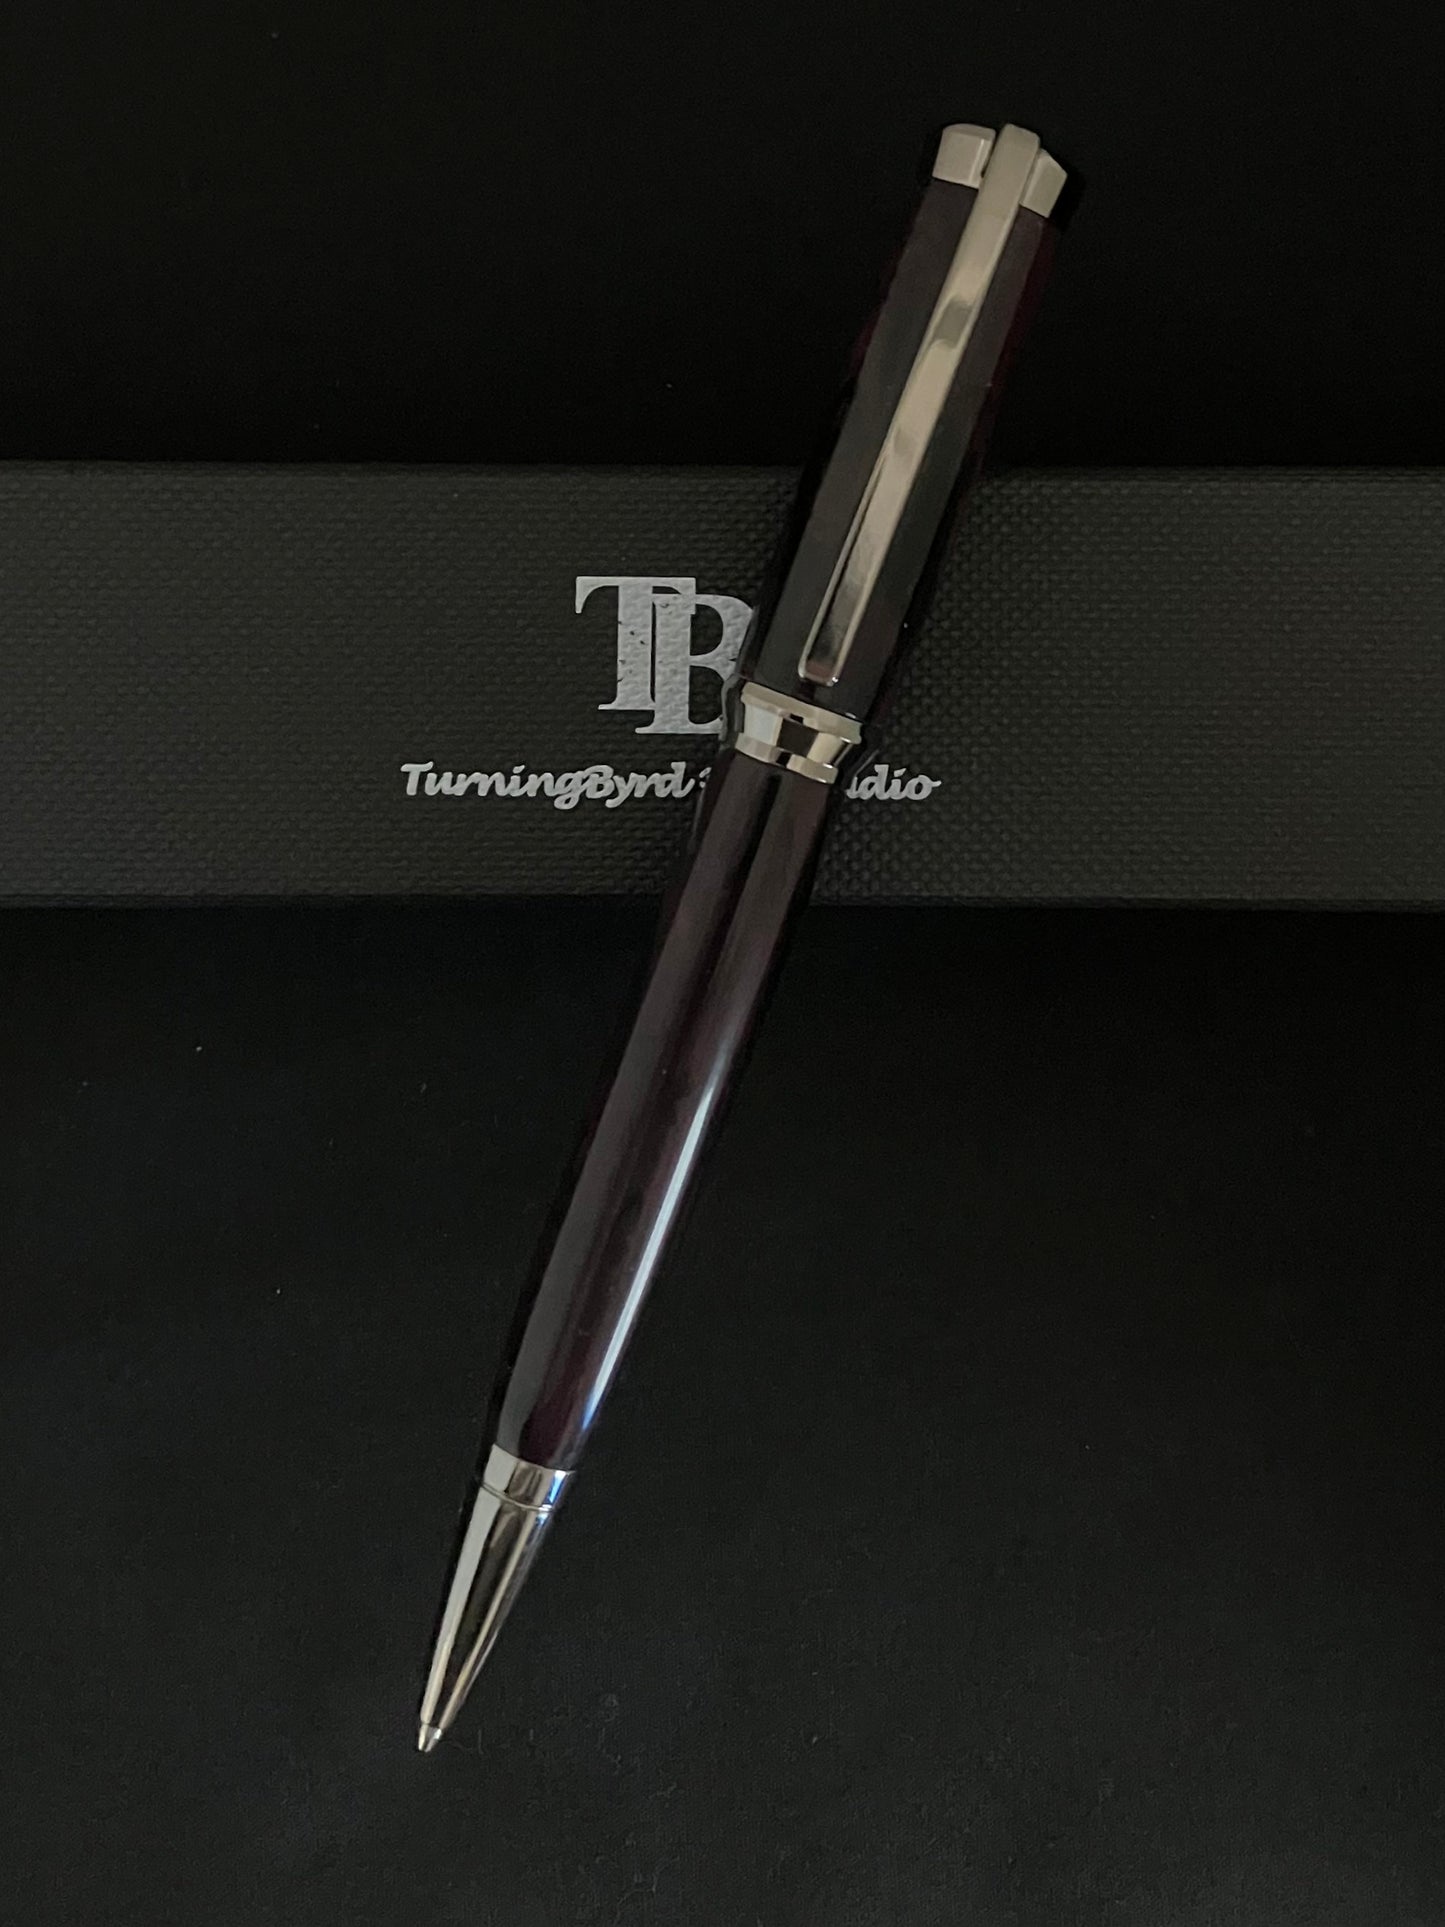 Upper and lower barrels are deep black burgundy resin, twist operation and chrome plated